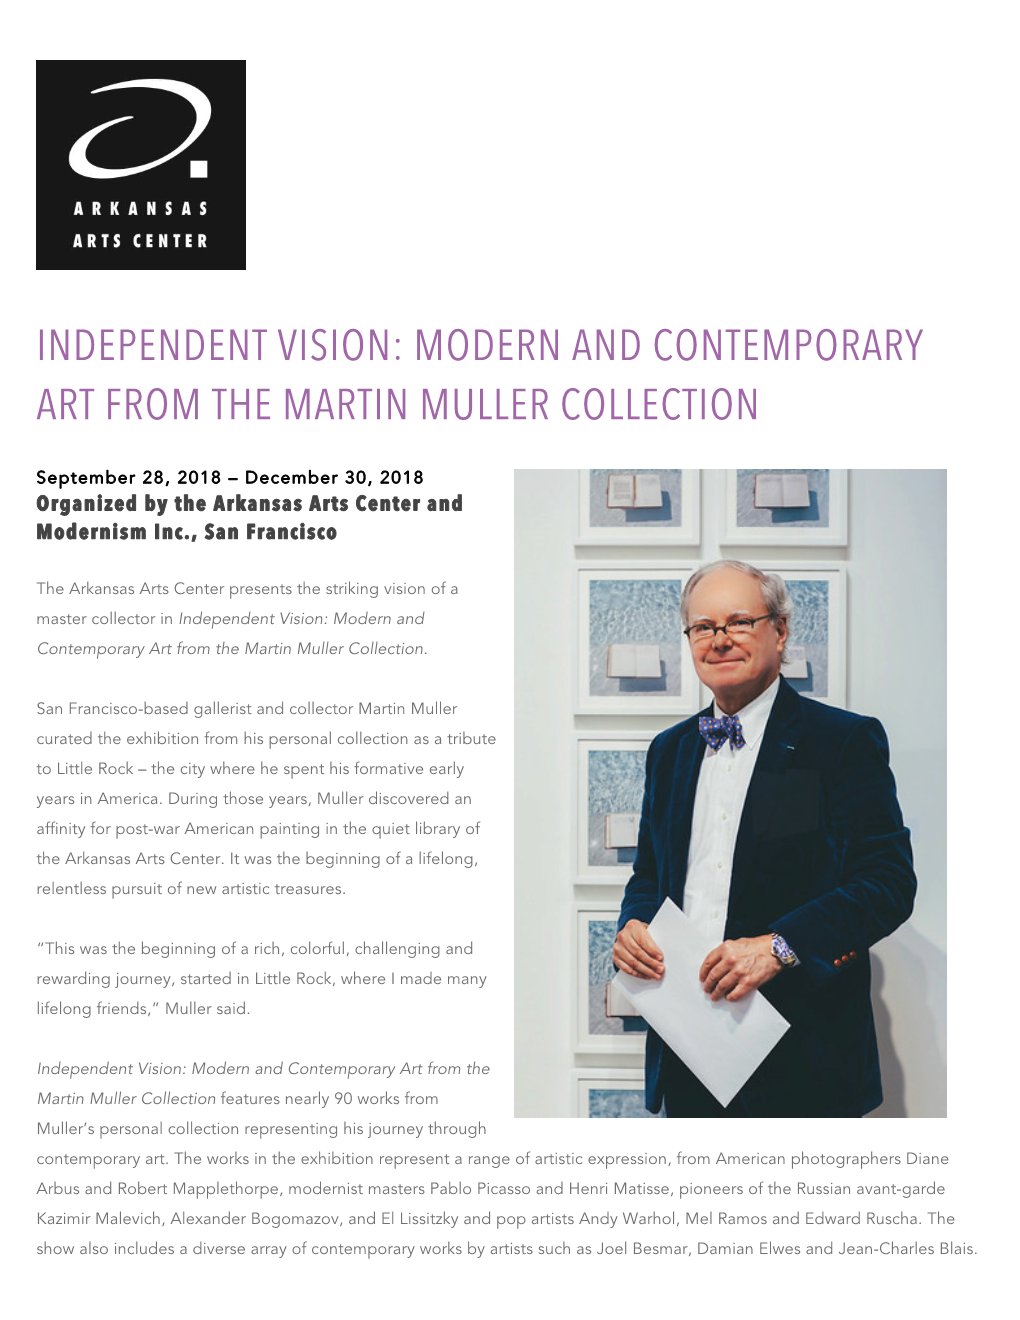 Independent Vision: Modern and Contemporary Art from the Martin Muller Collection